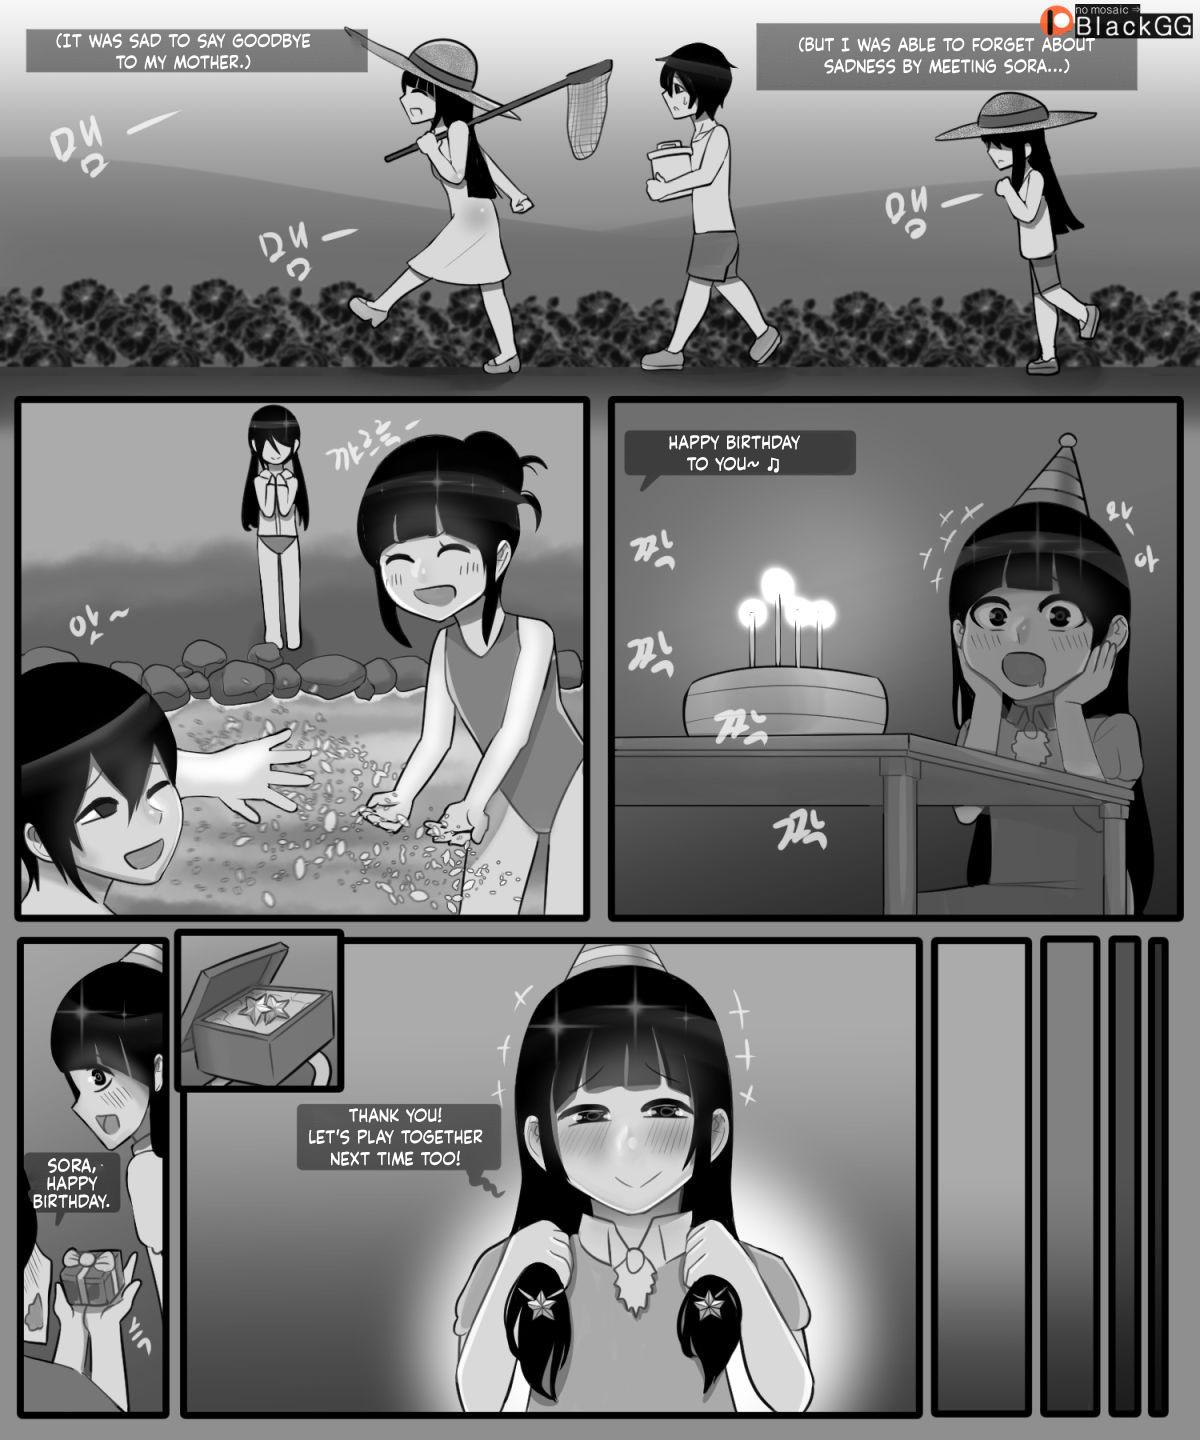 Dykes The story of a childhood friend becoming father's lover 1 - Original Scene - Page 3